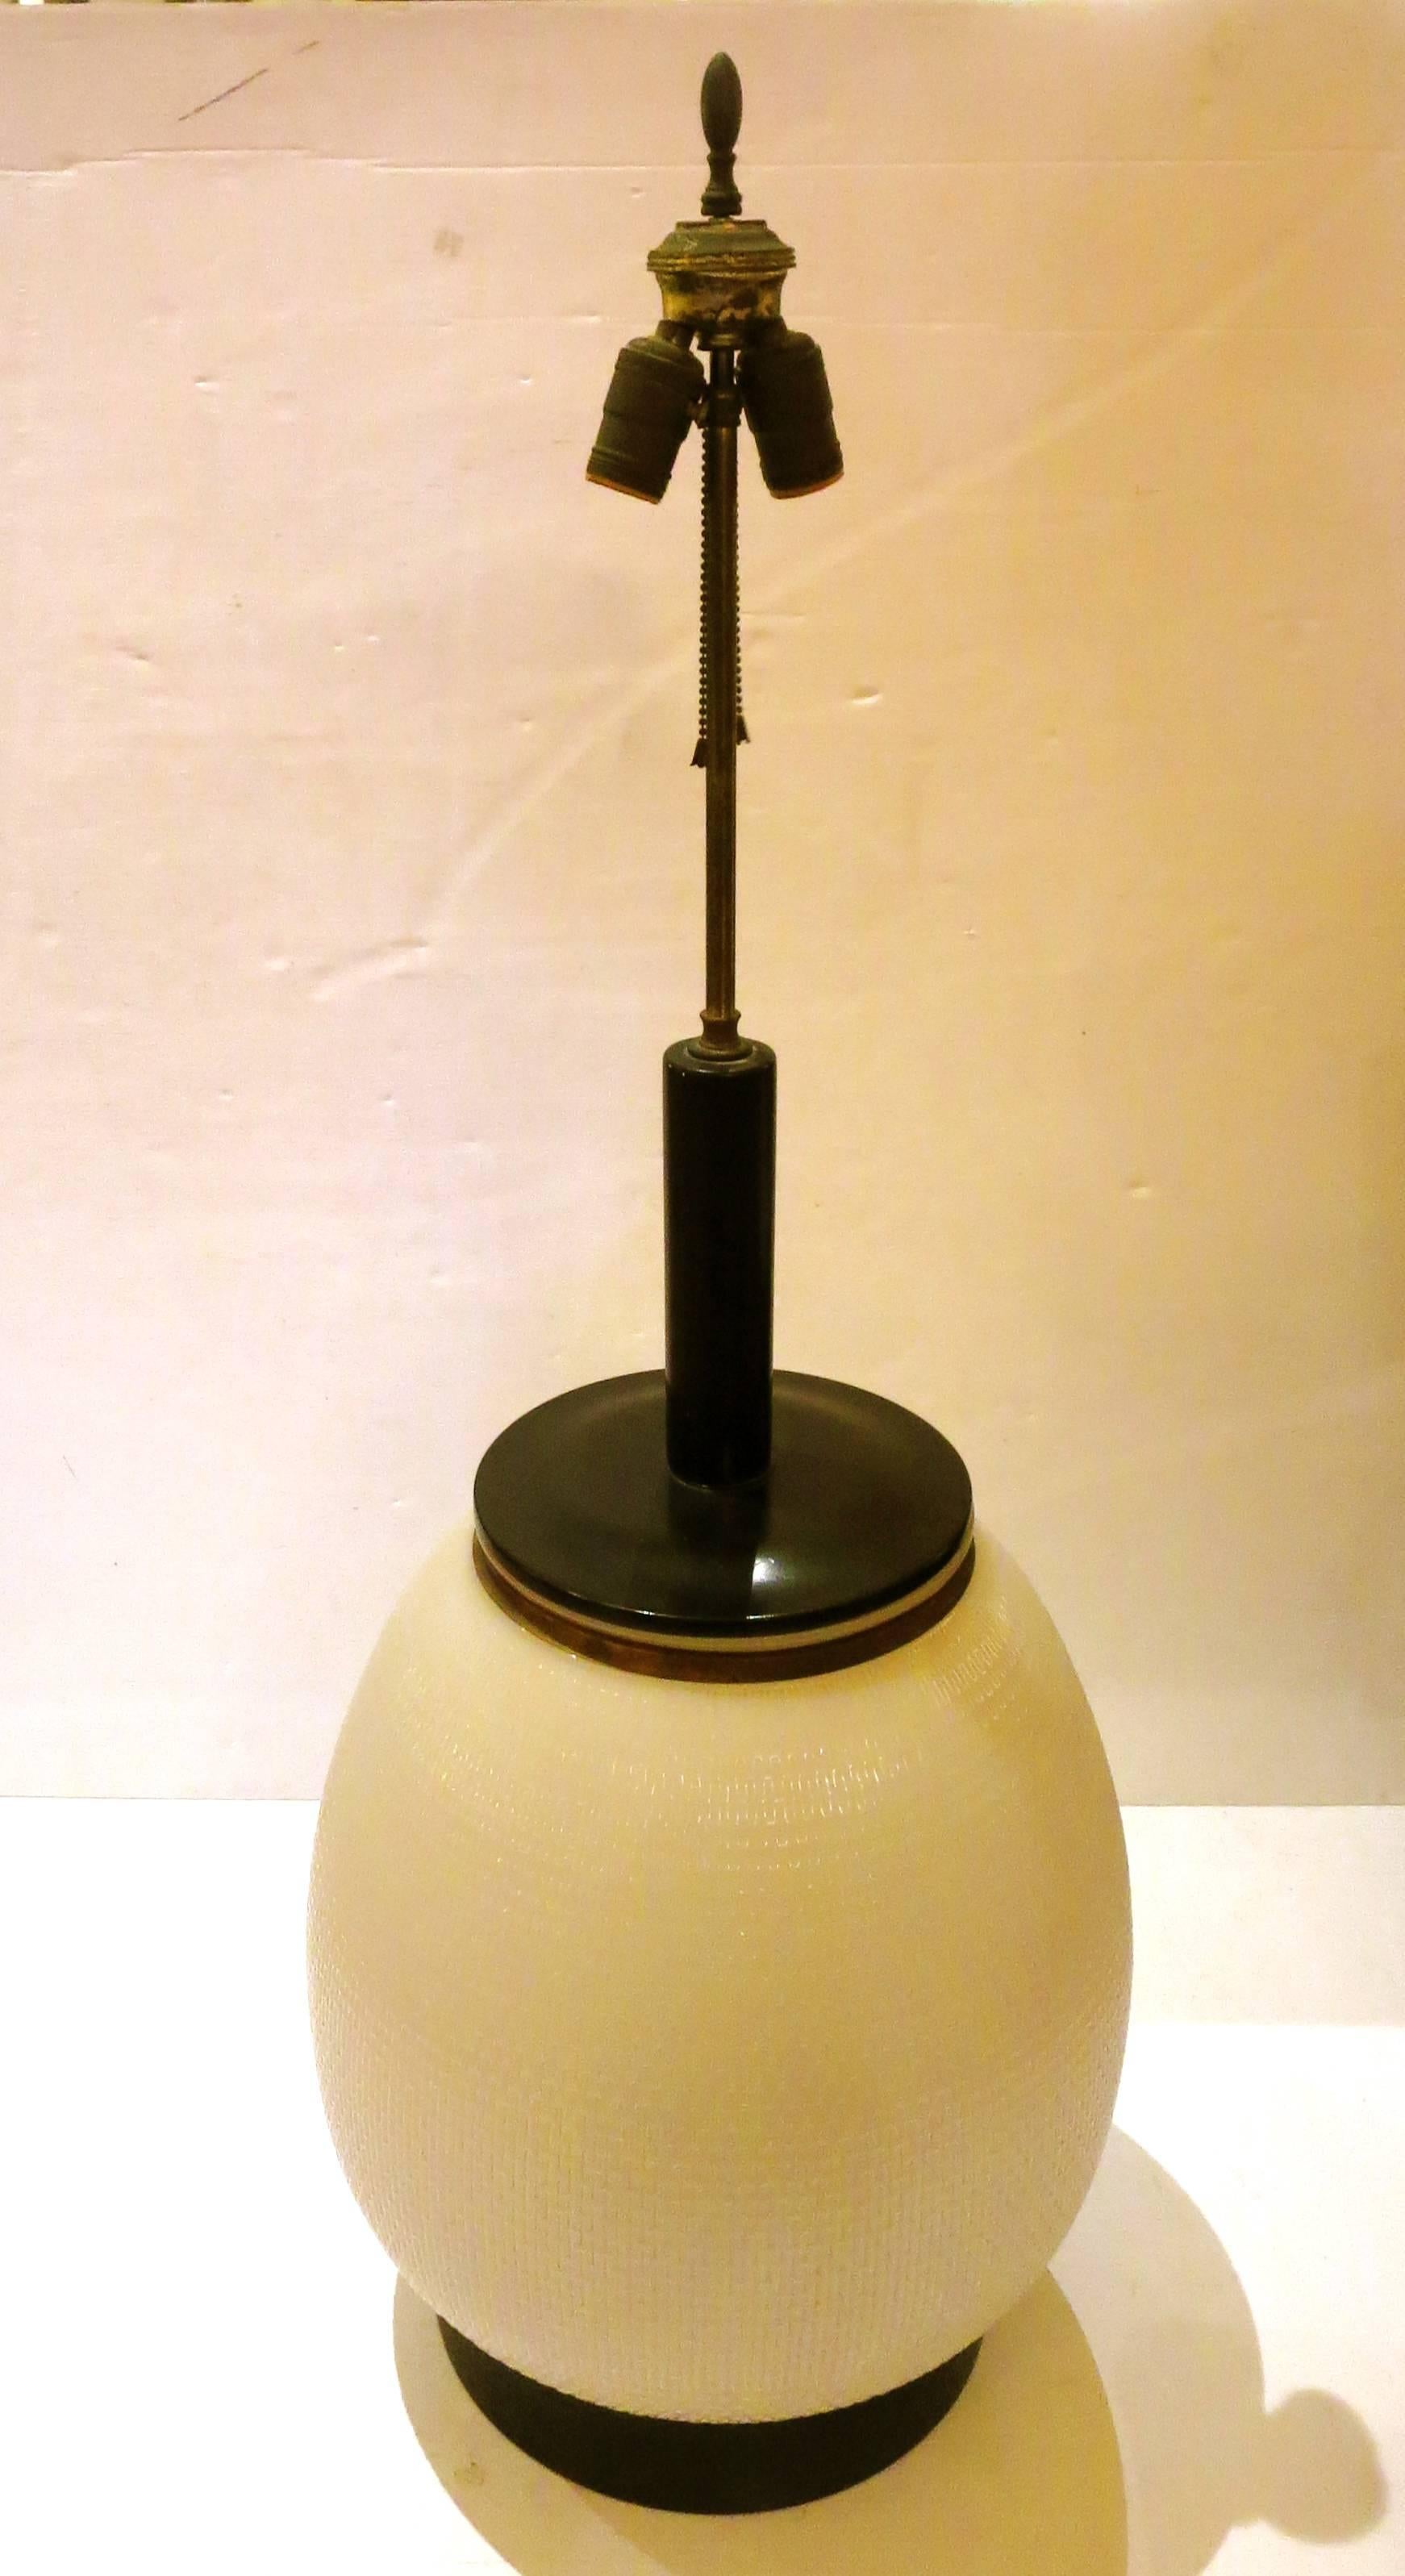 One-of-a-kind massive table base lamp by Westinghouse, milk glass converted into street lamp, circa 1940s, large and beautiful rewired double head socket and lamp base illuminates also, very nice and clean condition the sockets move up and down,